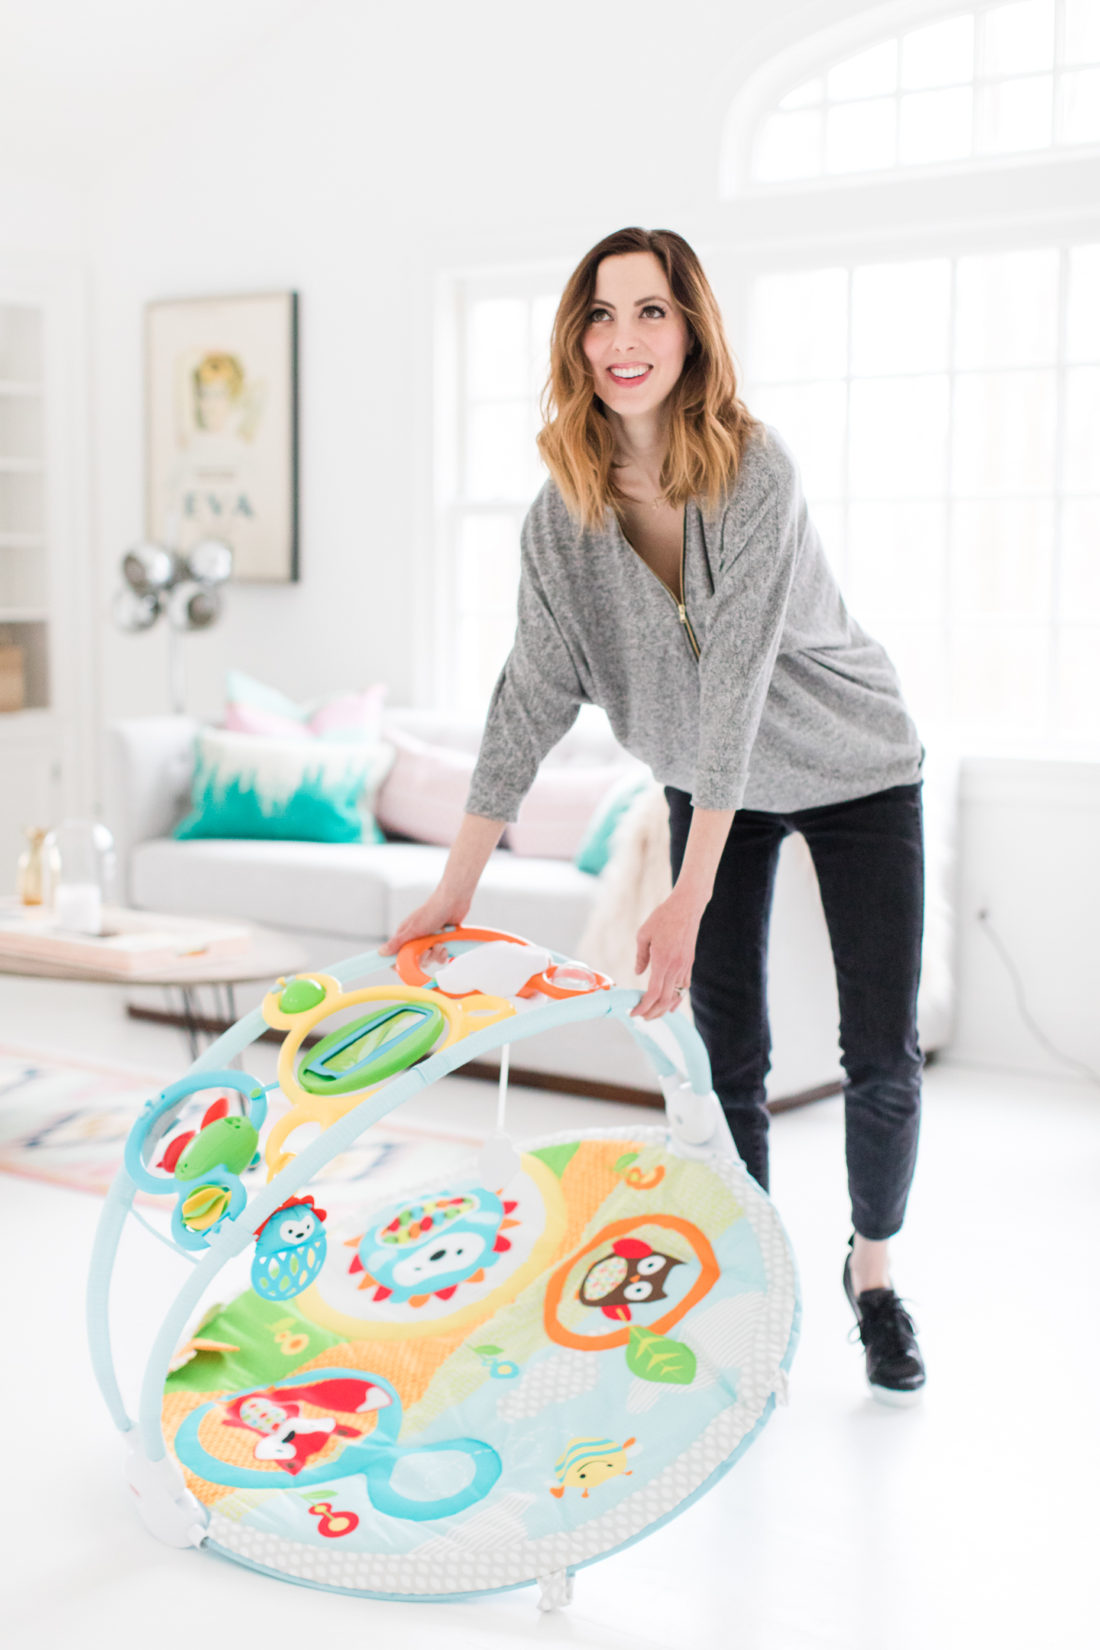 Eva Amurri Martino of lifestyle and Motherhood blog Happily Eva After sets up a play area in her home studio